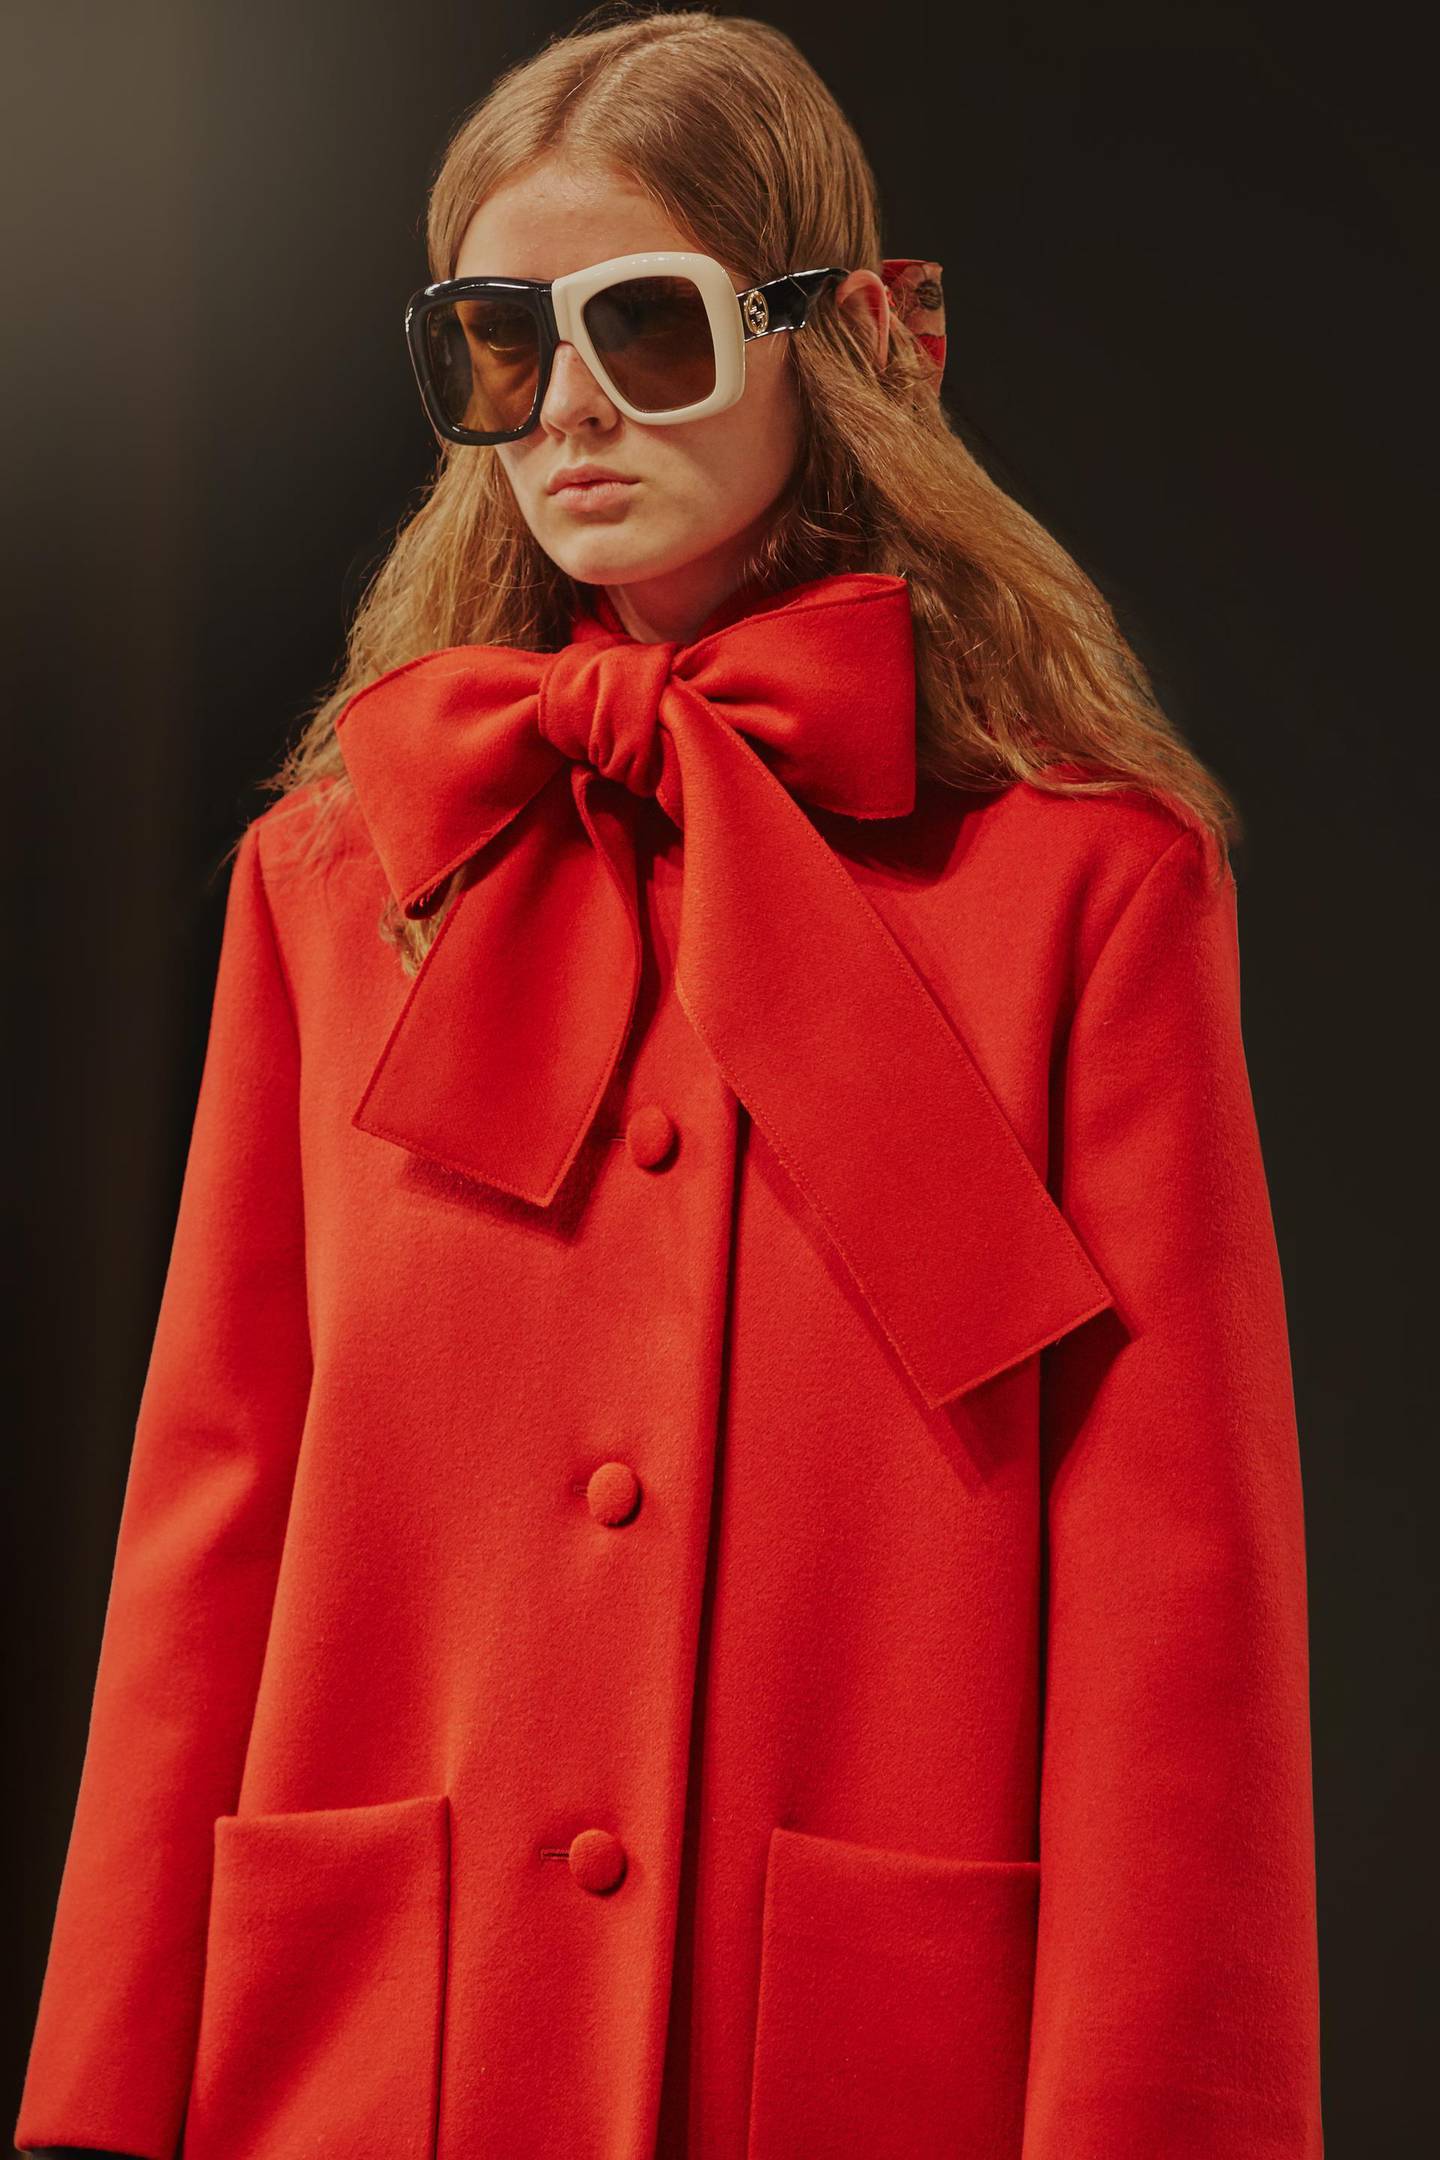 A heavy coat is given a playful bow at the neck, while mismatched sunglasses make this pure Gucci